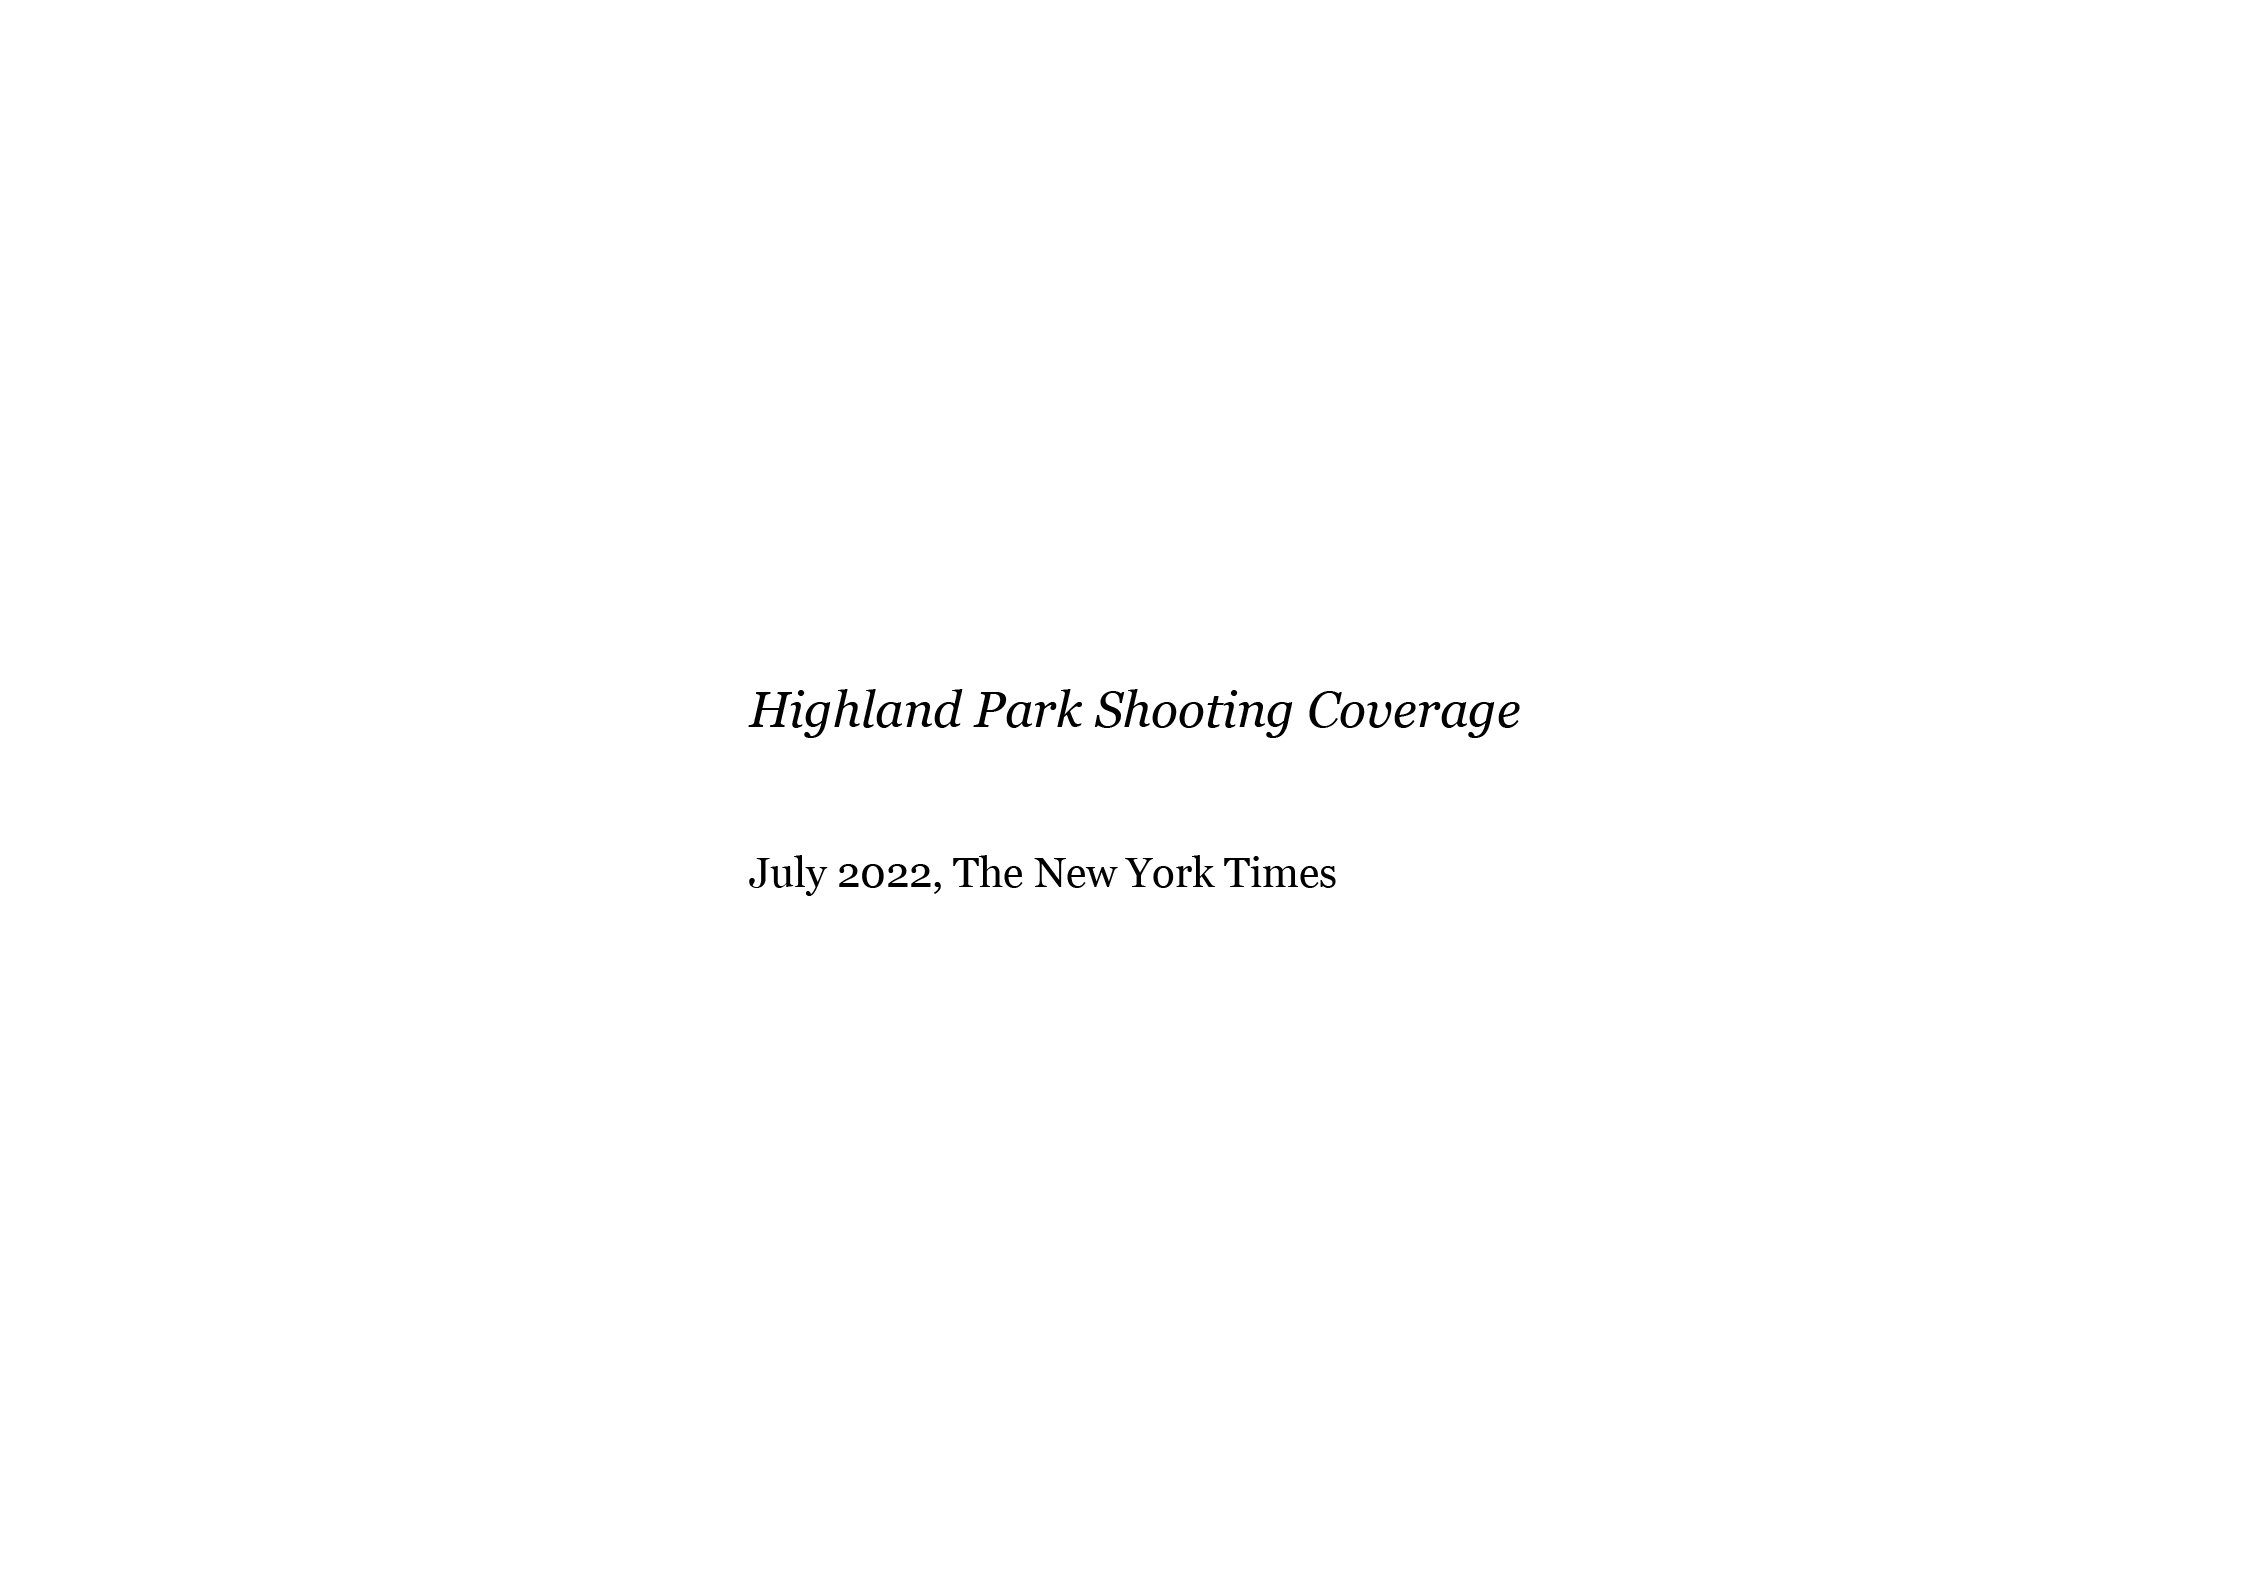  Highland Park Shooting Coverage  The New York Times, July 5, 2022    The New York Times. July 10, 2022   